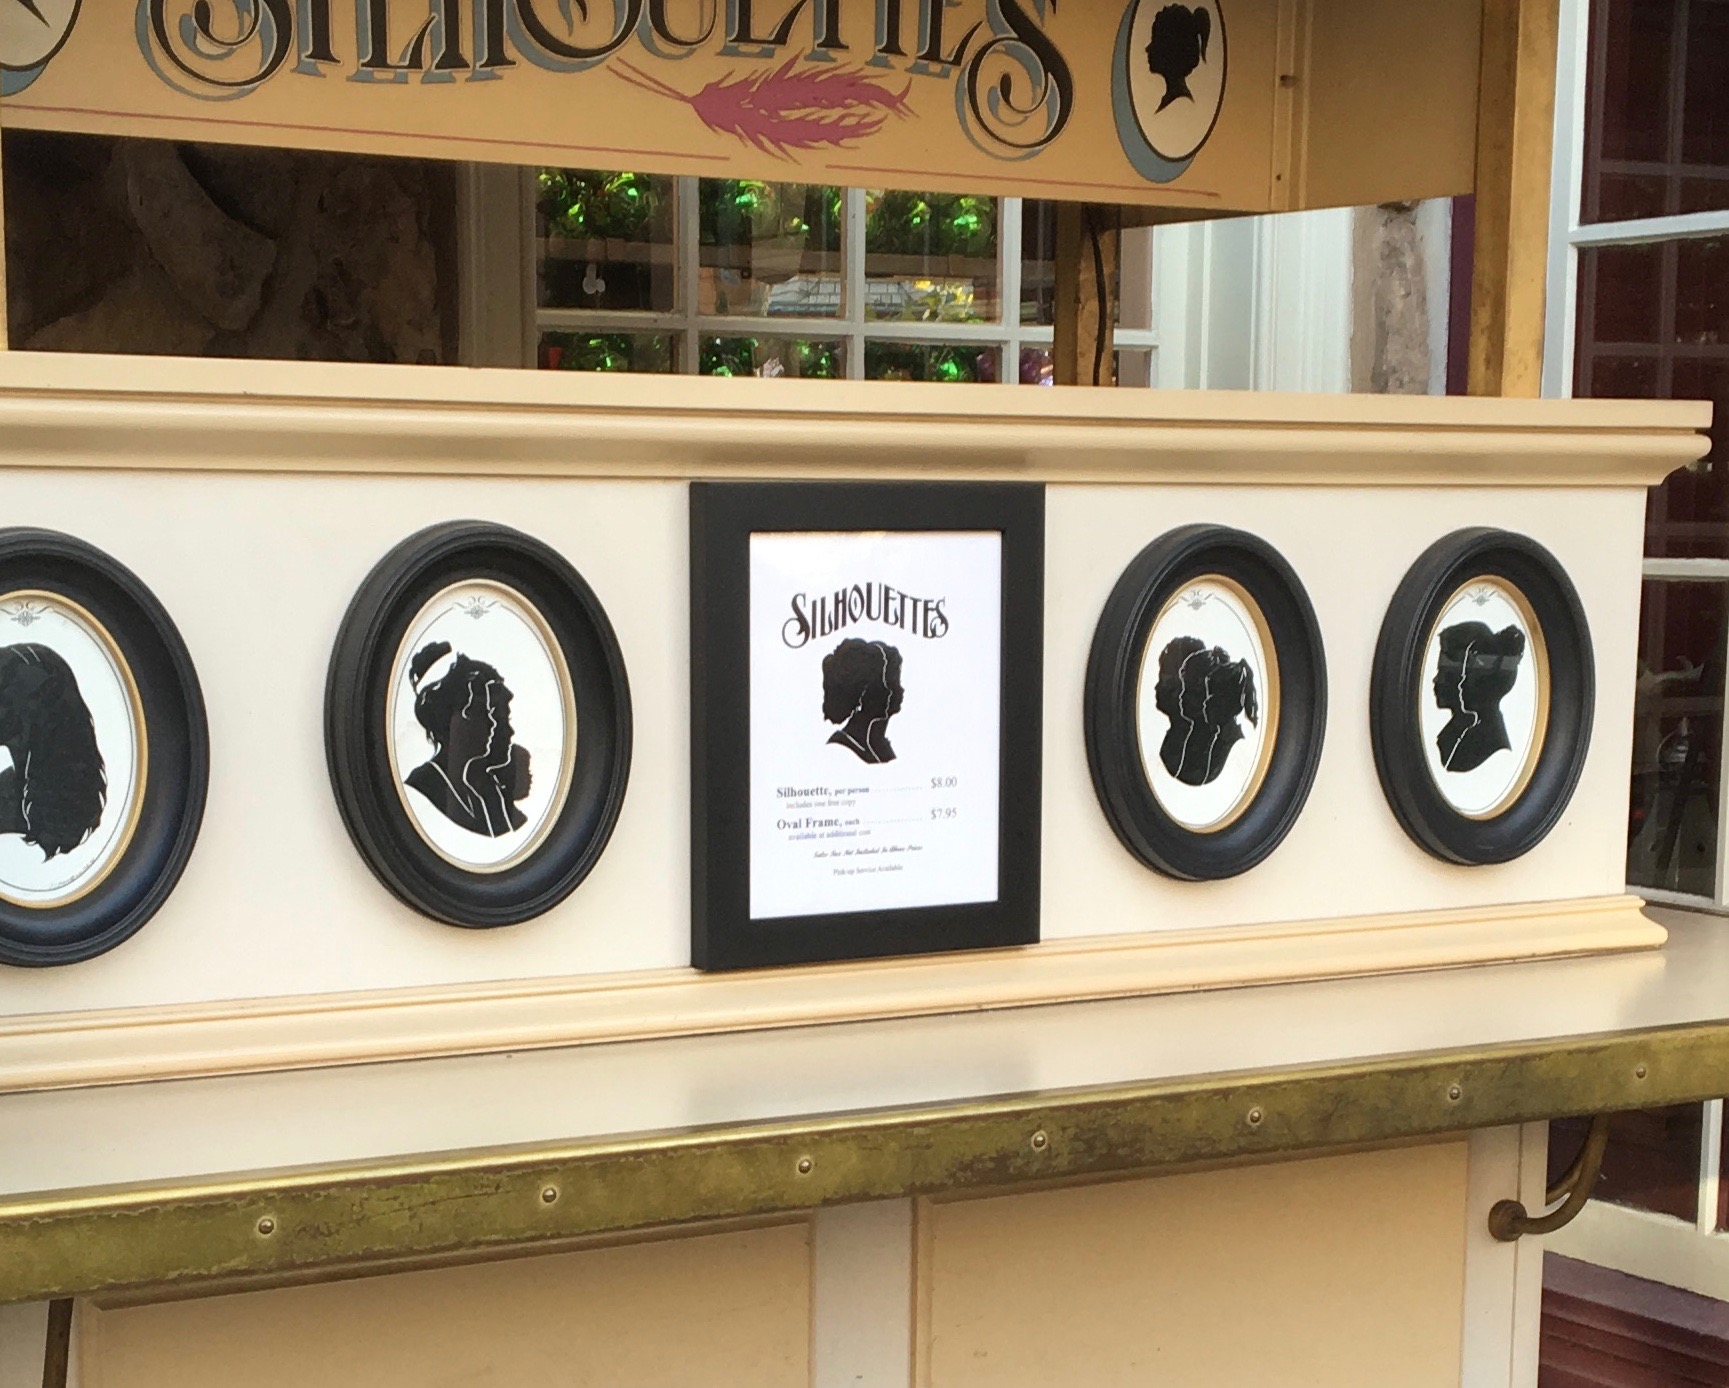 PHOTOS: Don't Get These Souvenirs in Disney World Without Reading